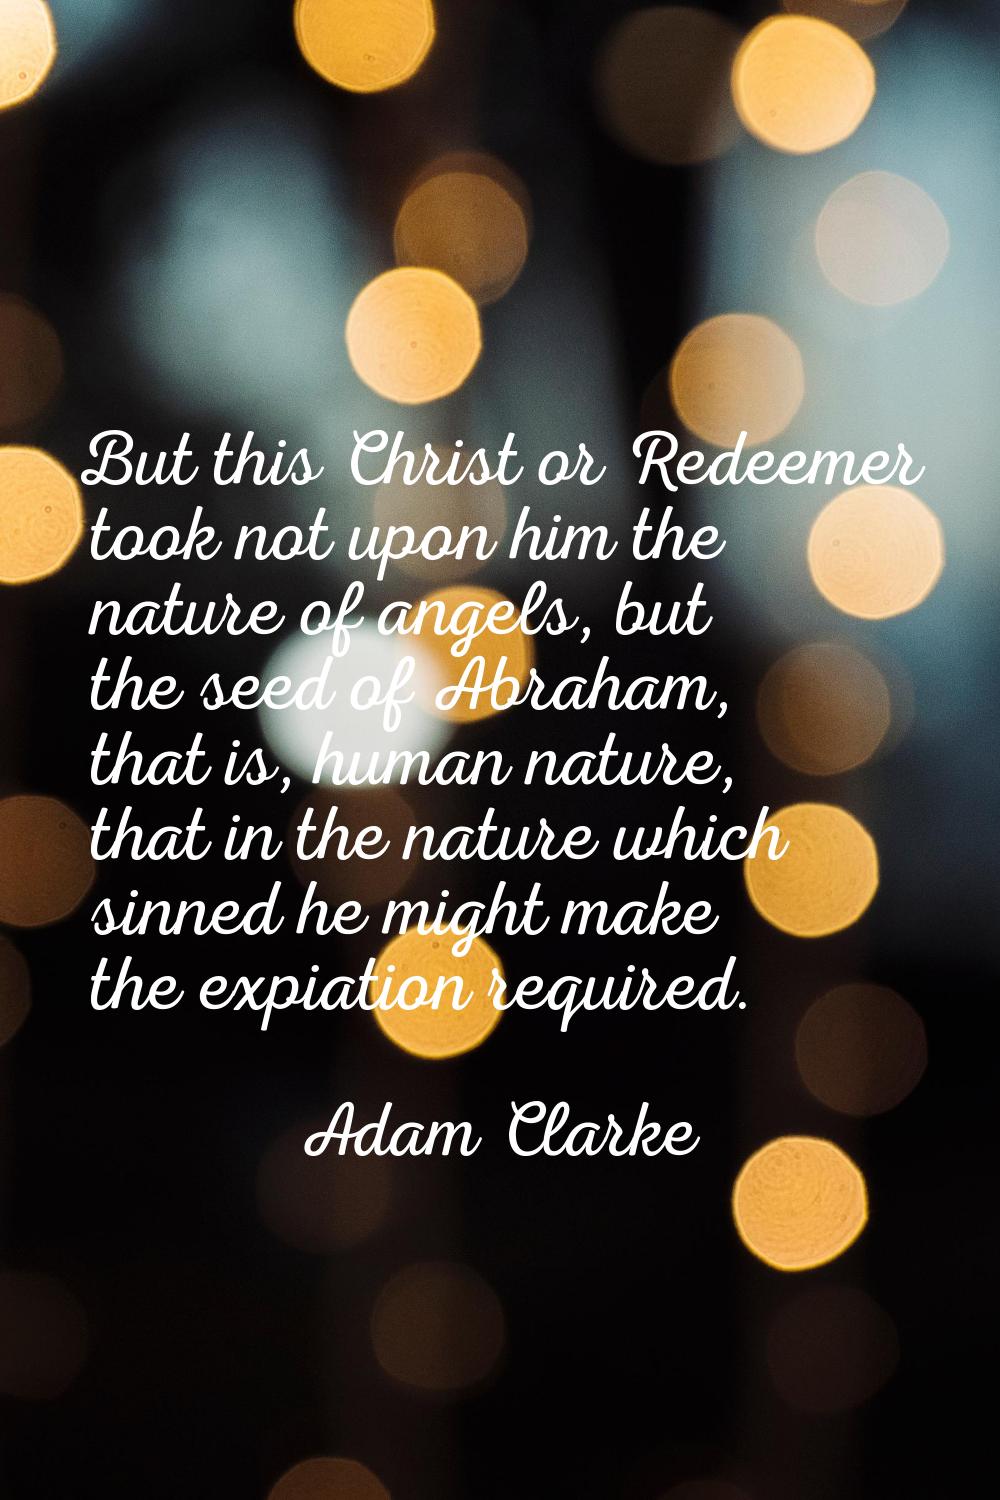 But this Christ or Redeemer took not upon him the nature of angels, but the seed of Abraham, that i